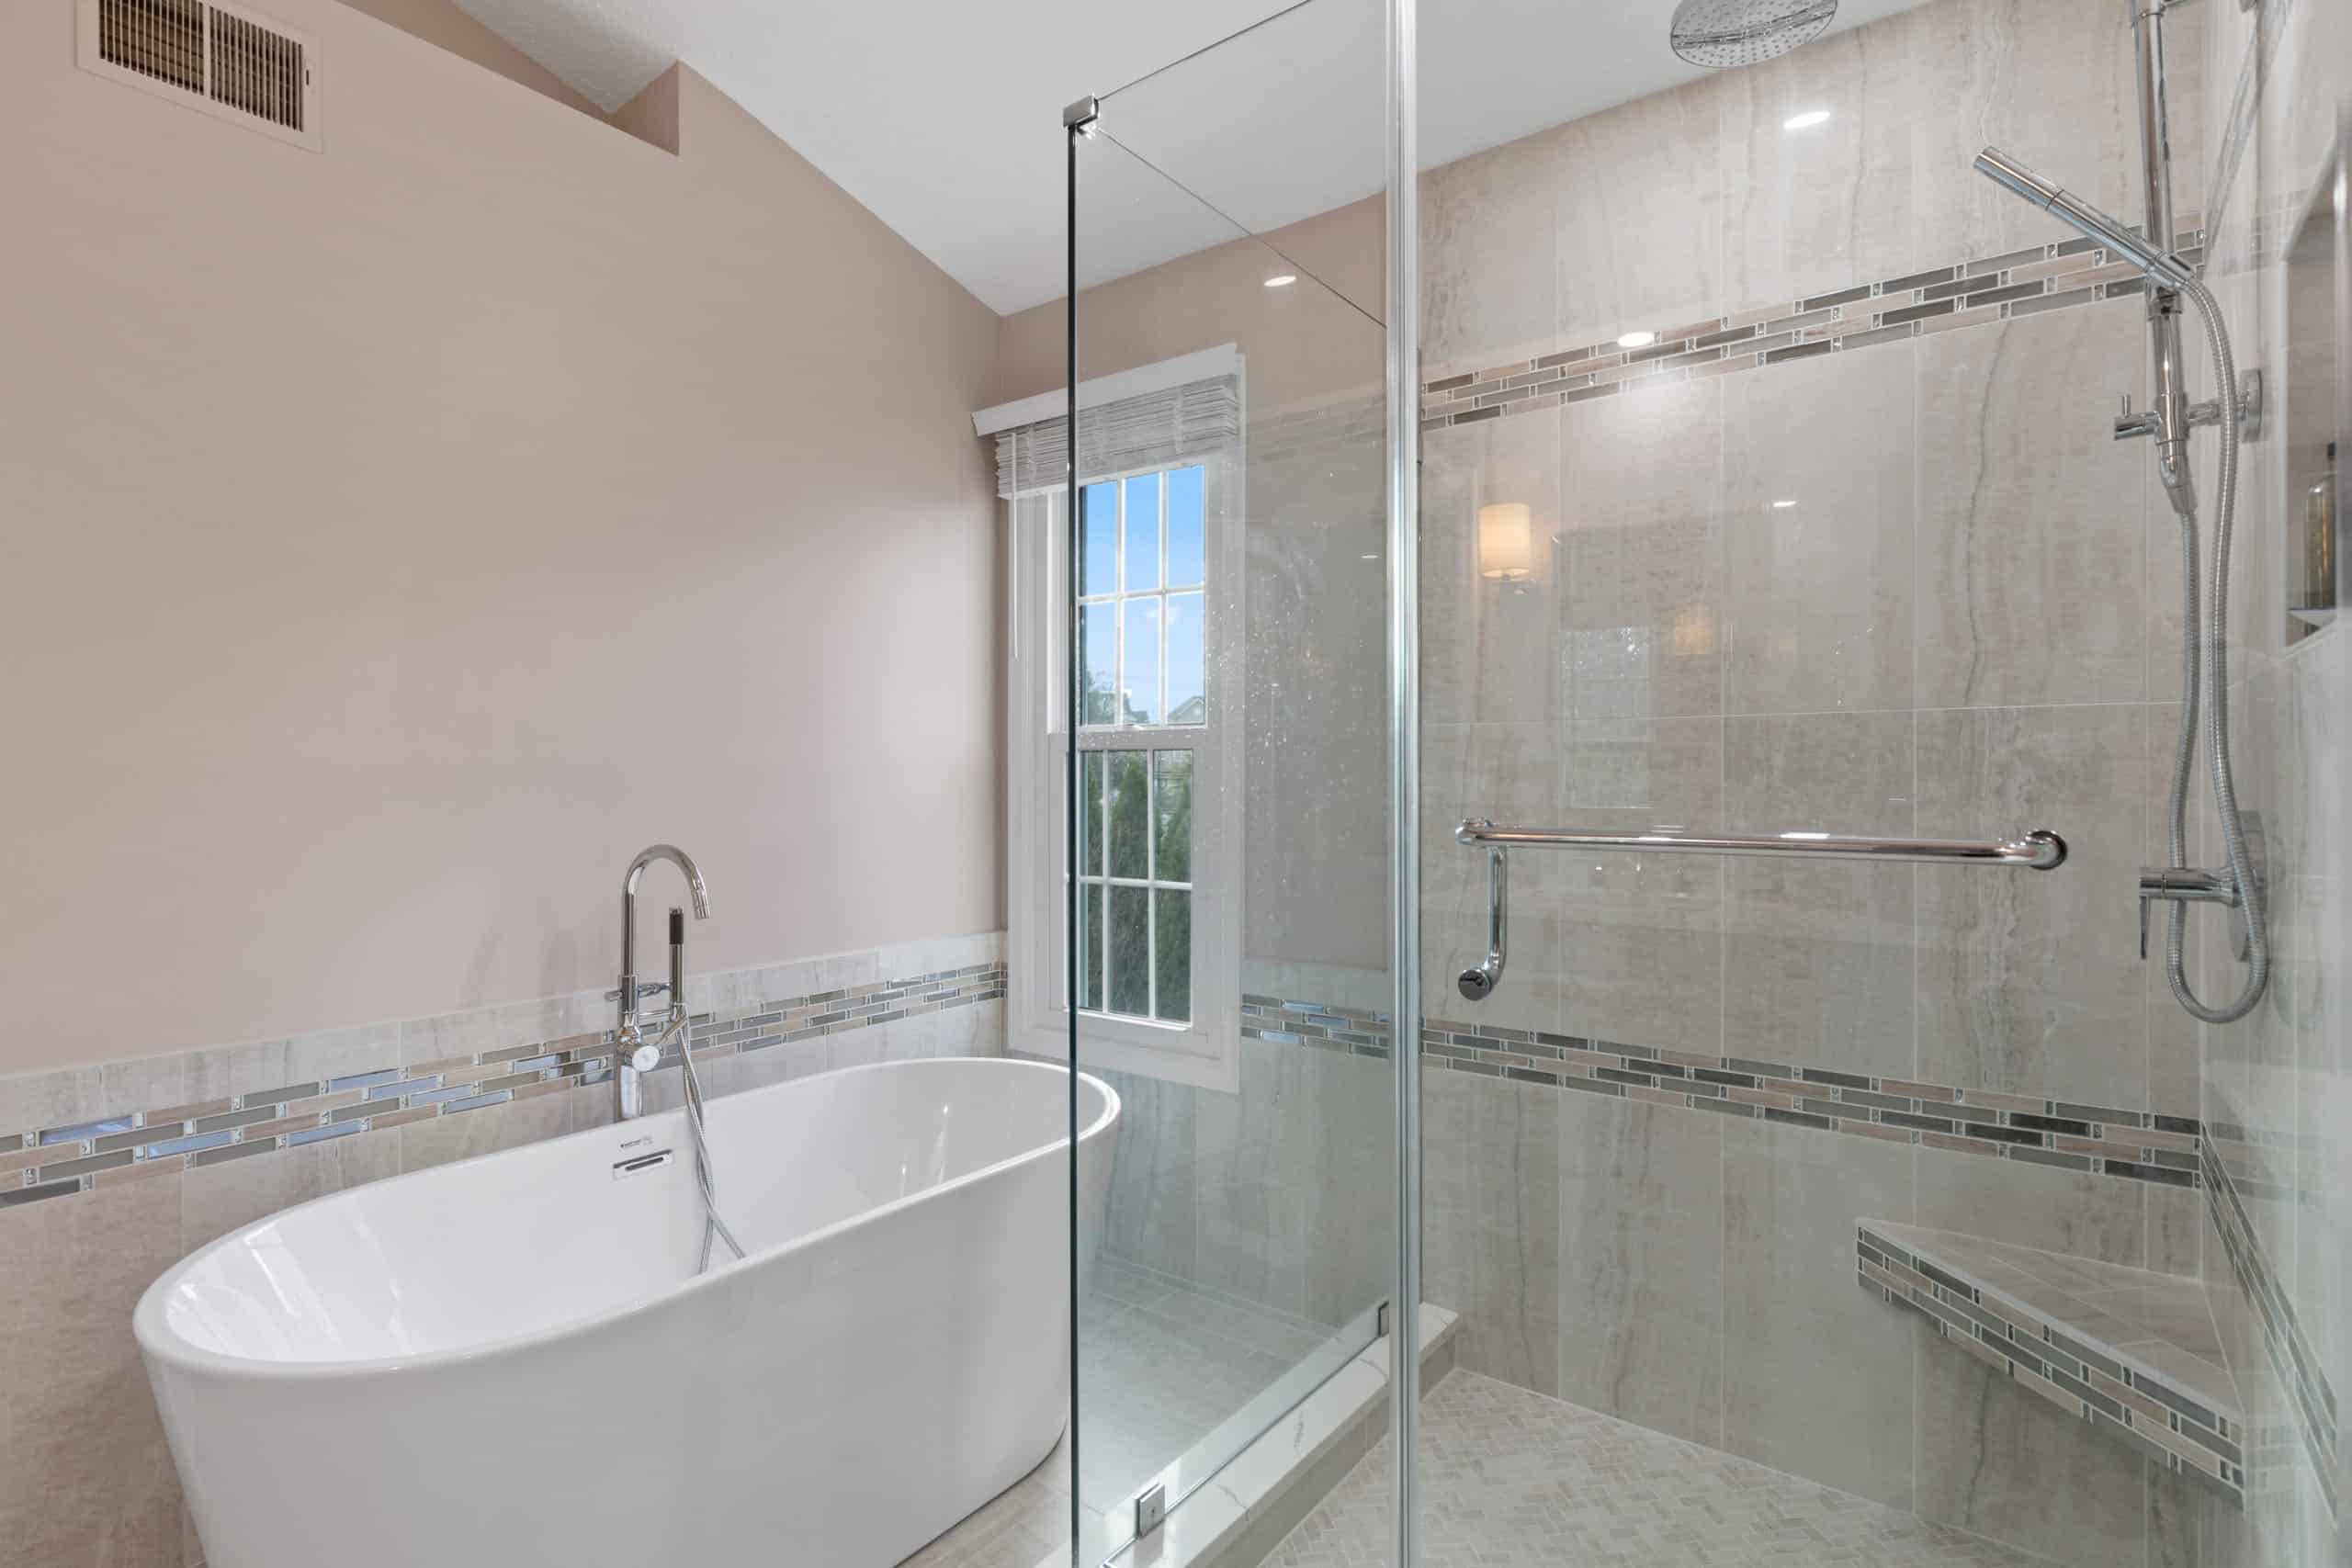 Light pink bathroom with elegant walk-in shower and tub